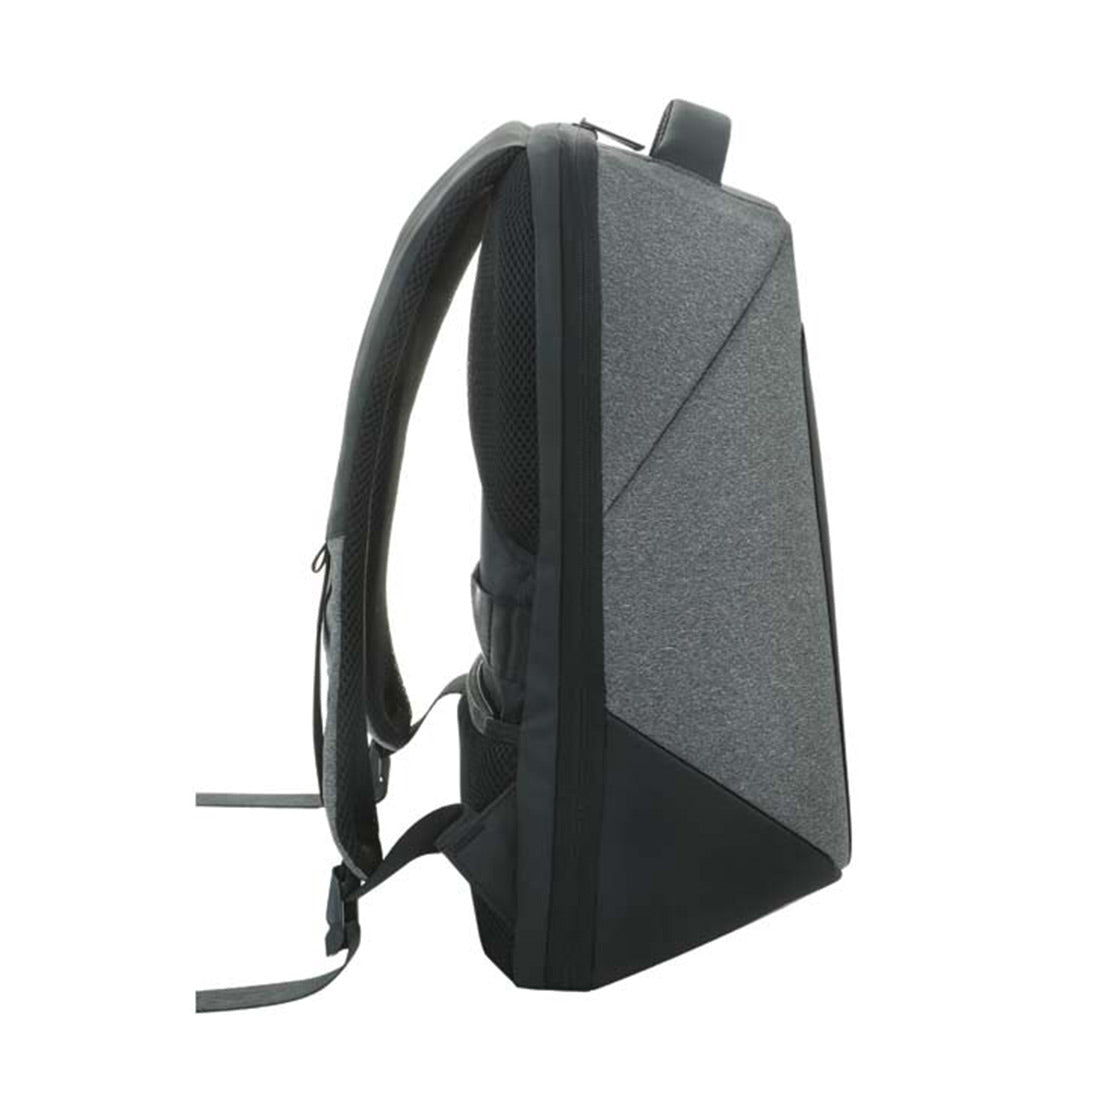 Santhome Laptop Backpack With Usb Port